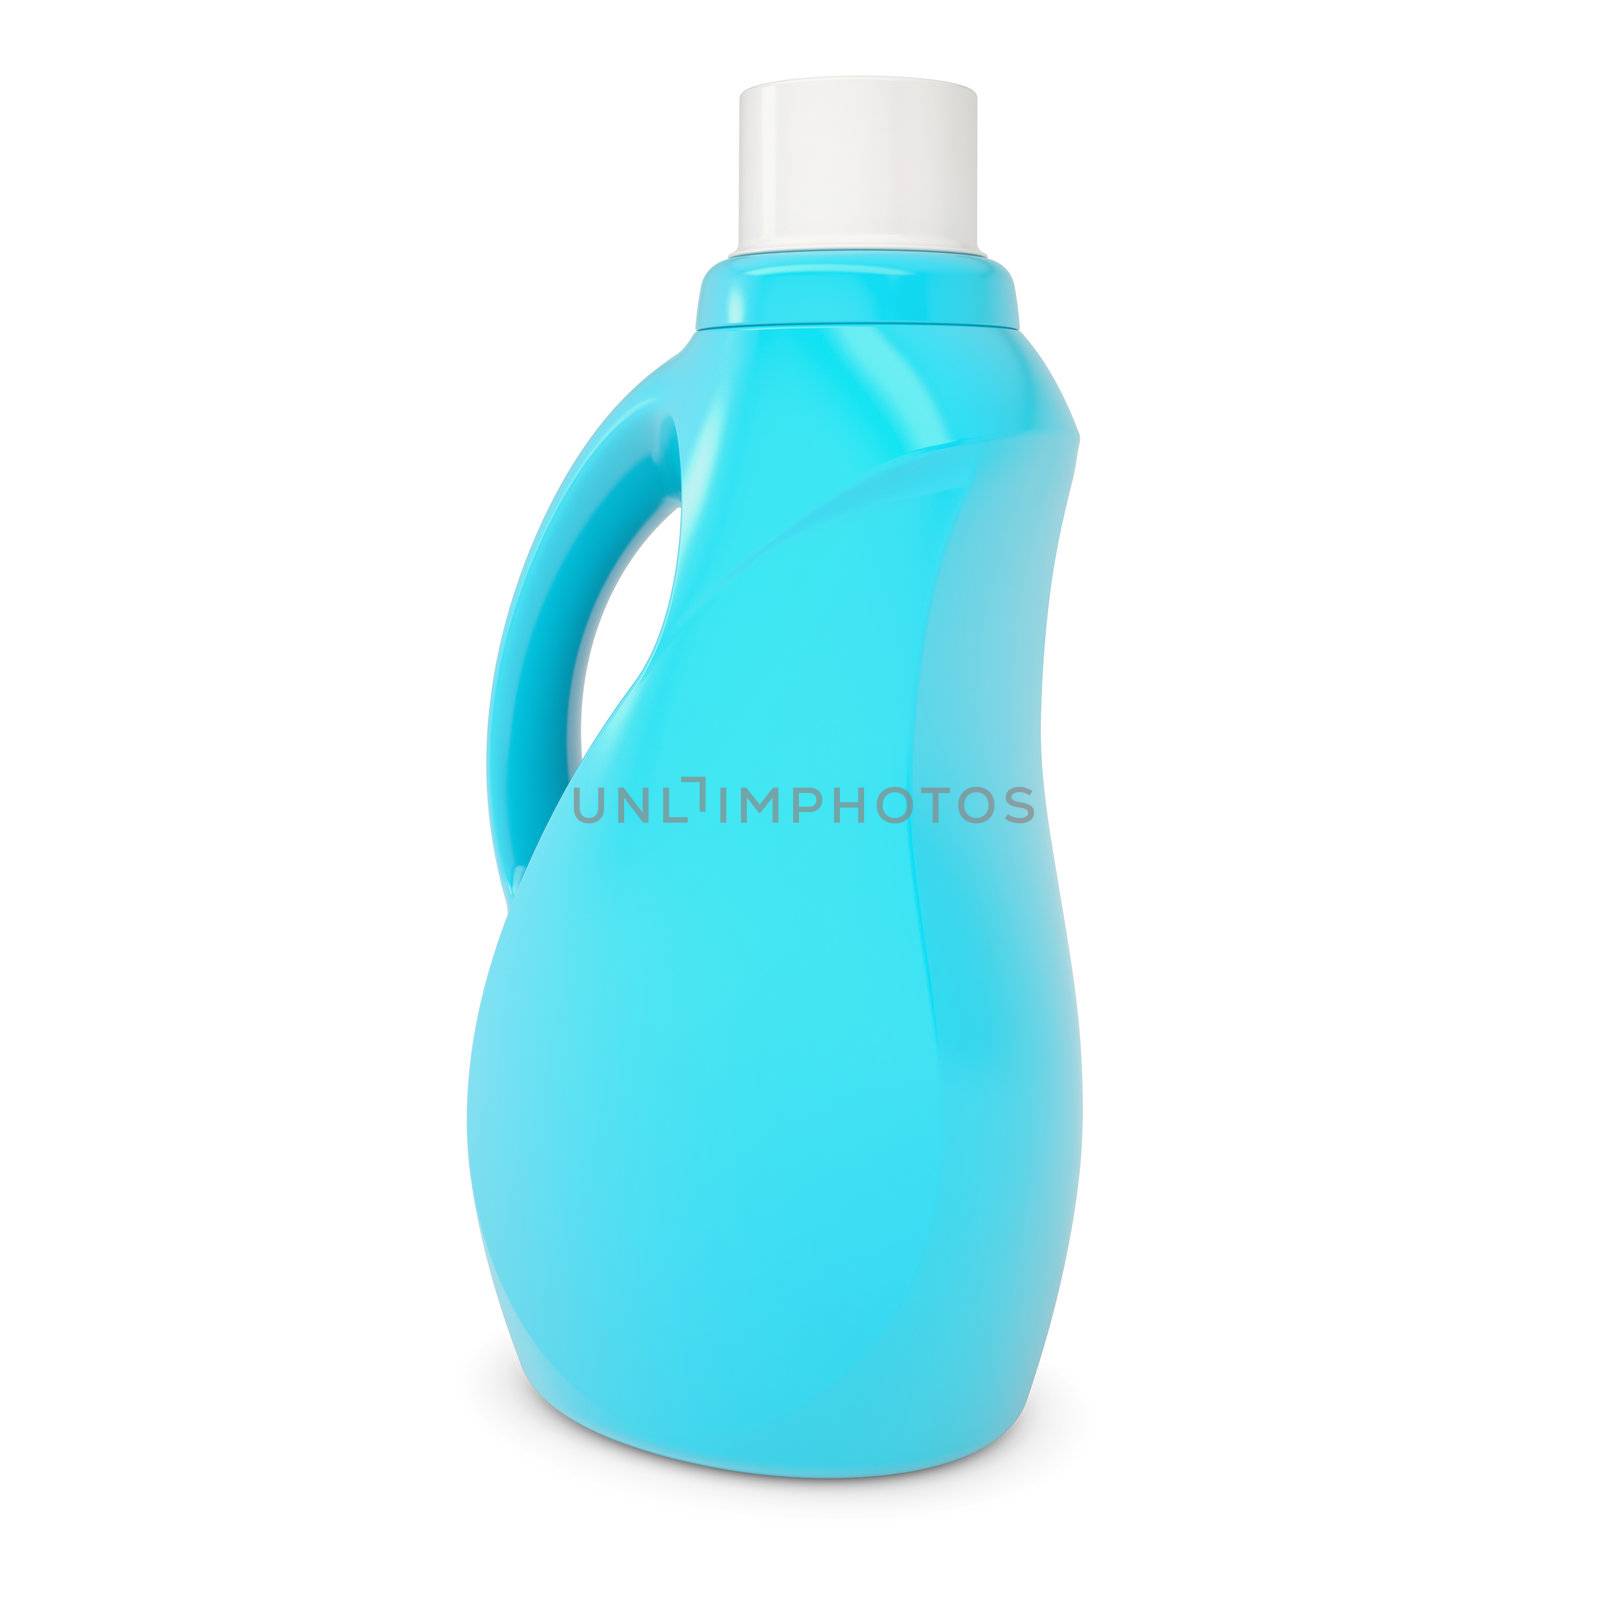 Plastic bottle of household chemicals by cherezoff